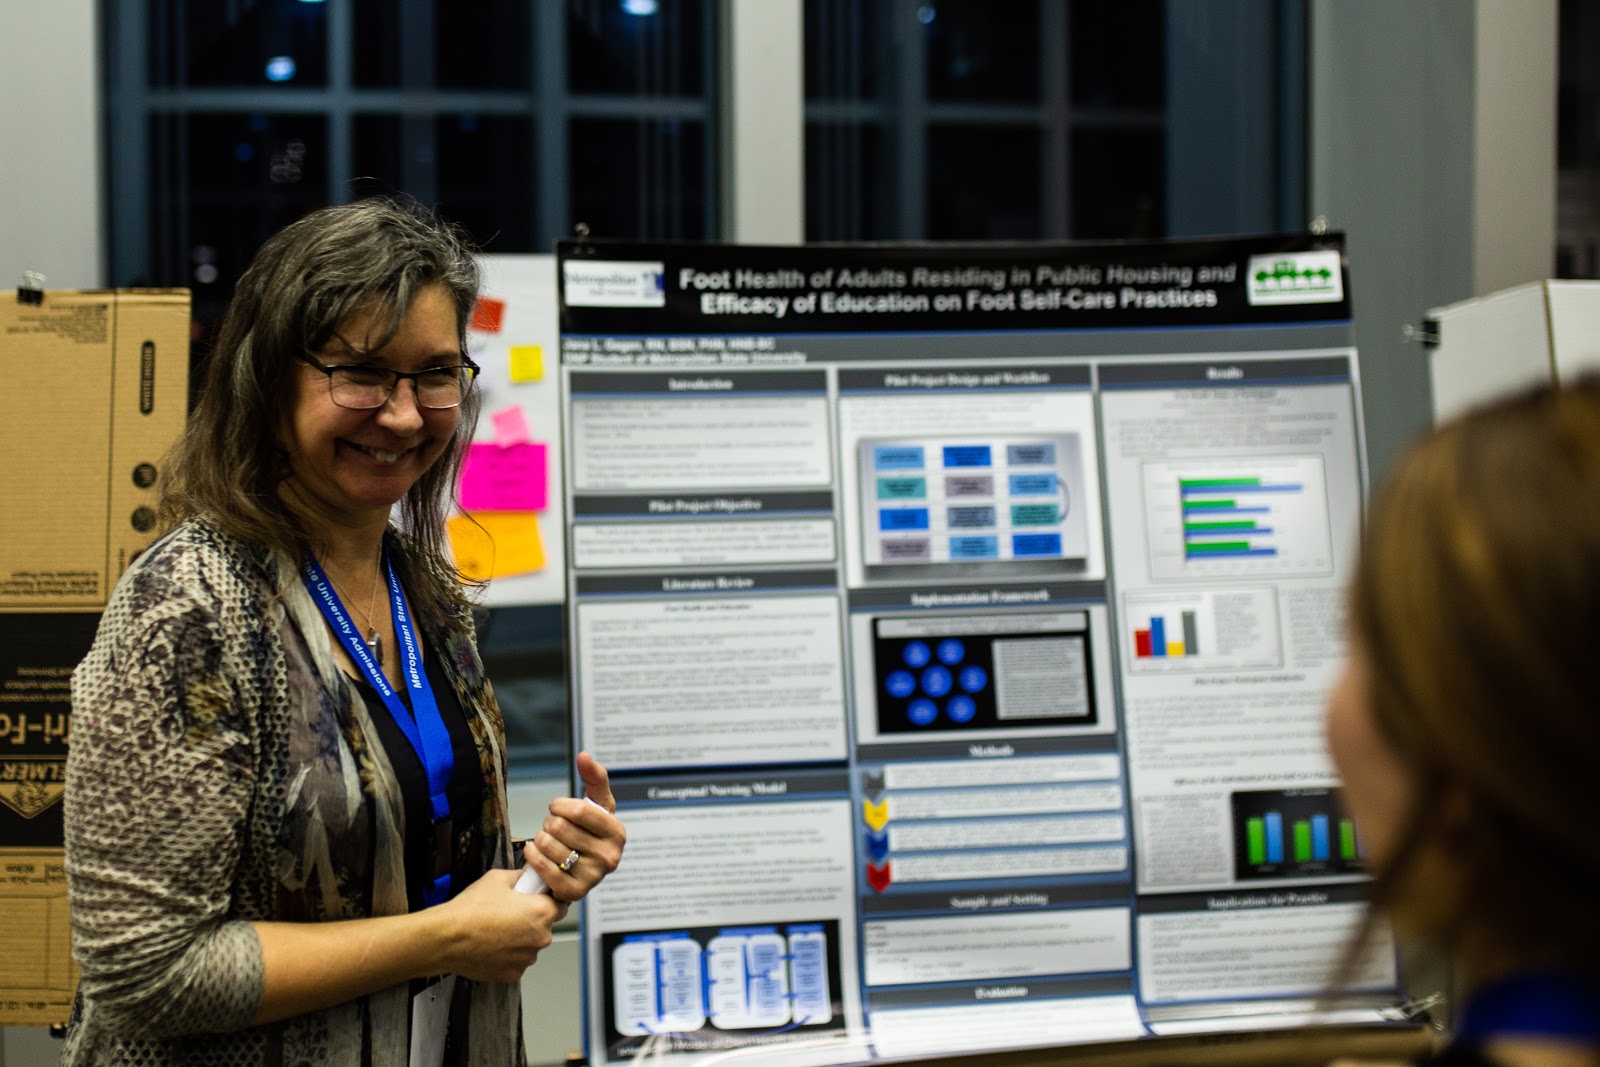 Students pour passion into posters at annual research conference